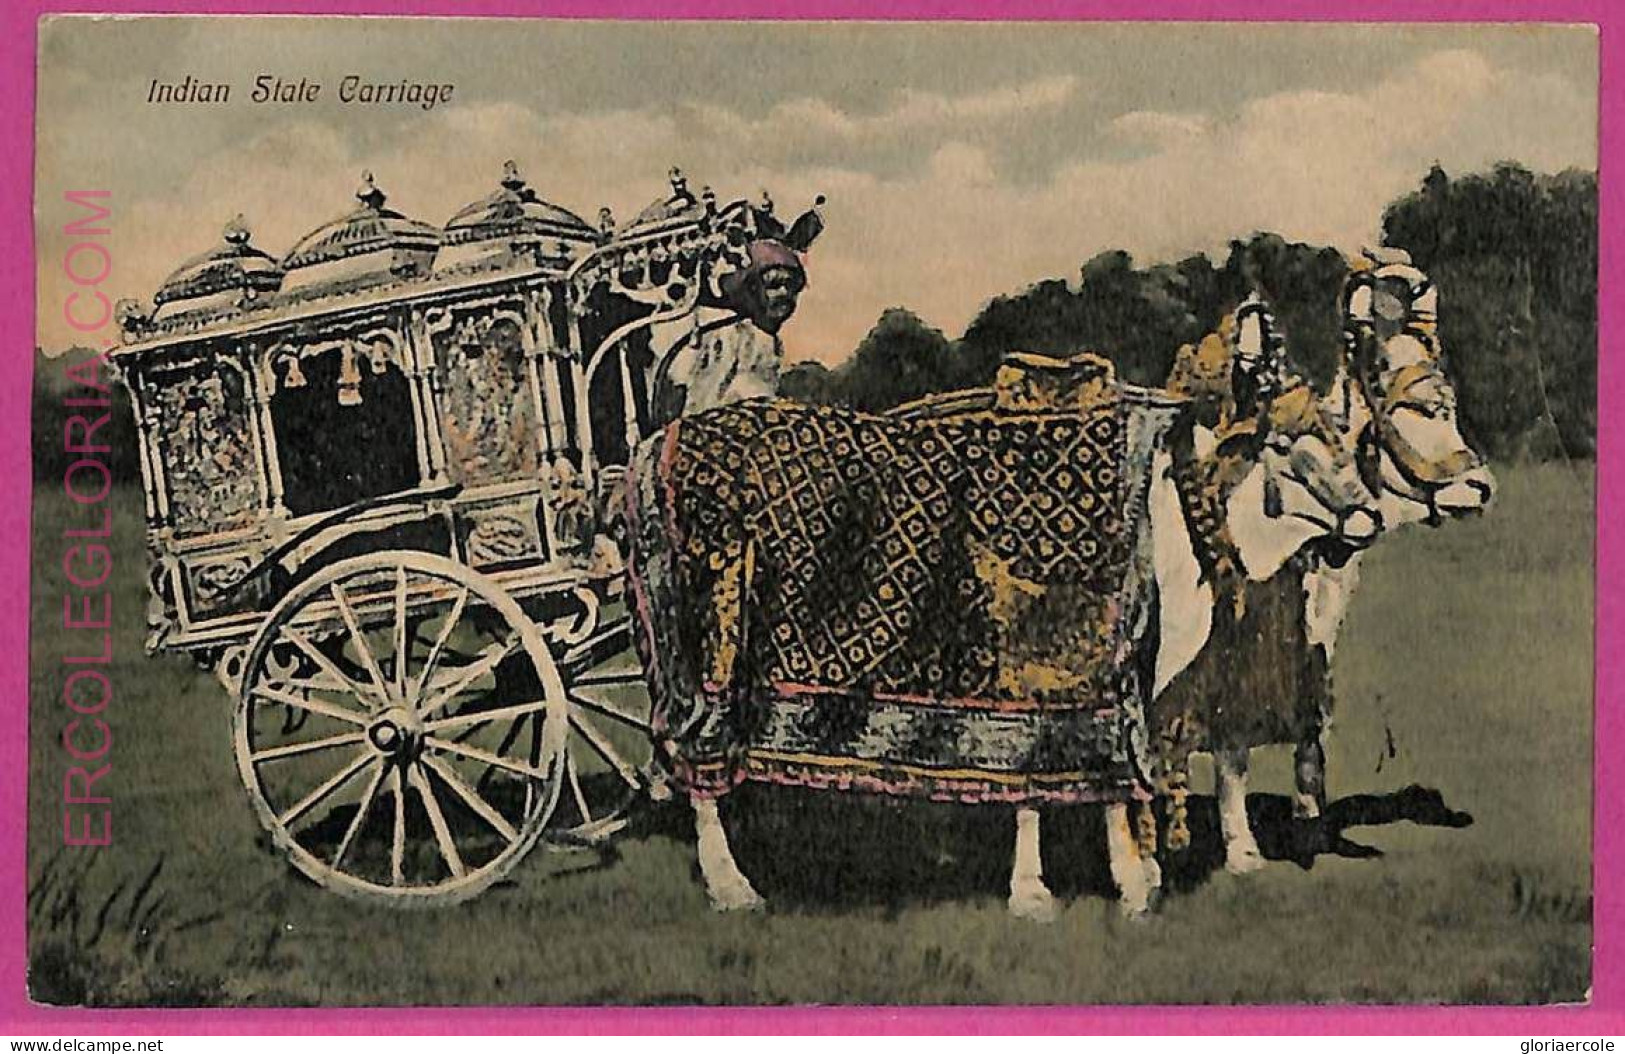 Ag3786  - INDIA - VINTAGE POSTCARD  - Ethnic, Indian State Carriage - India